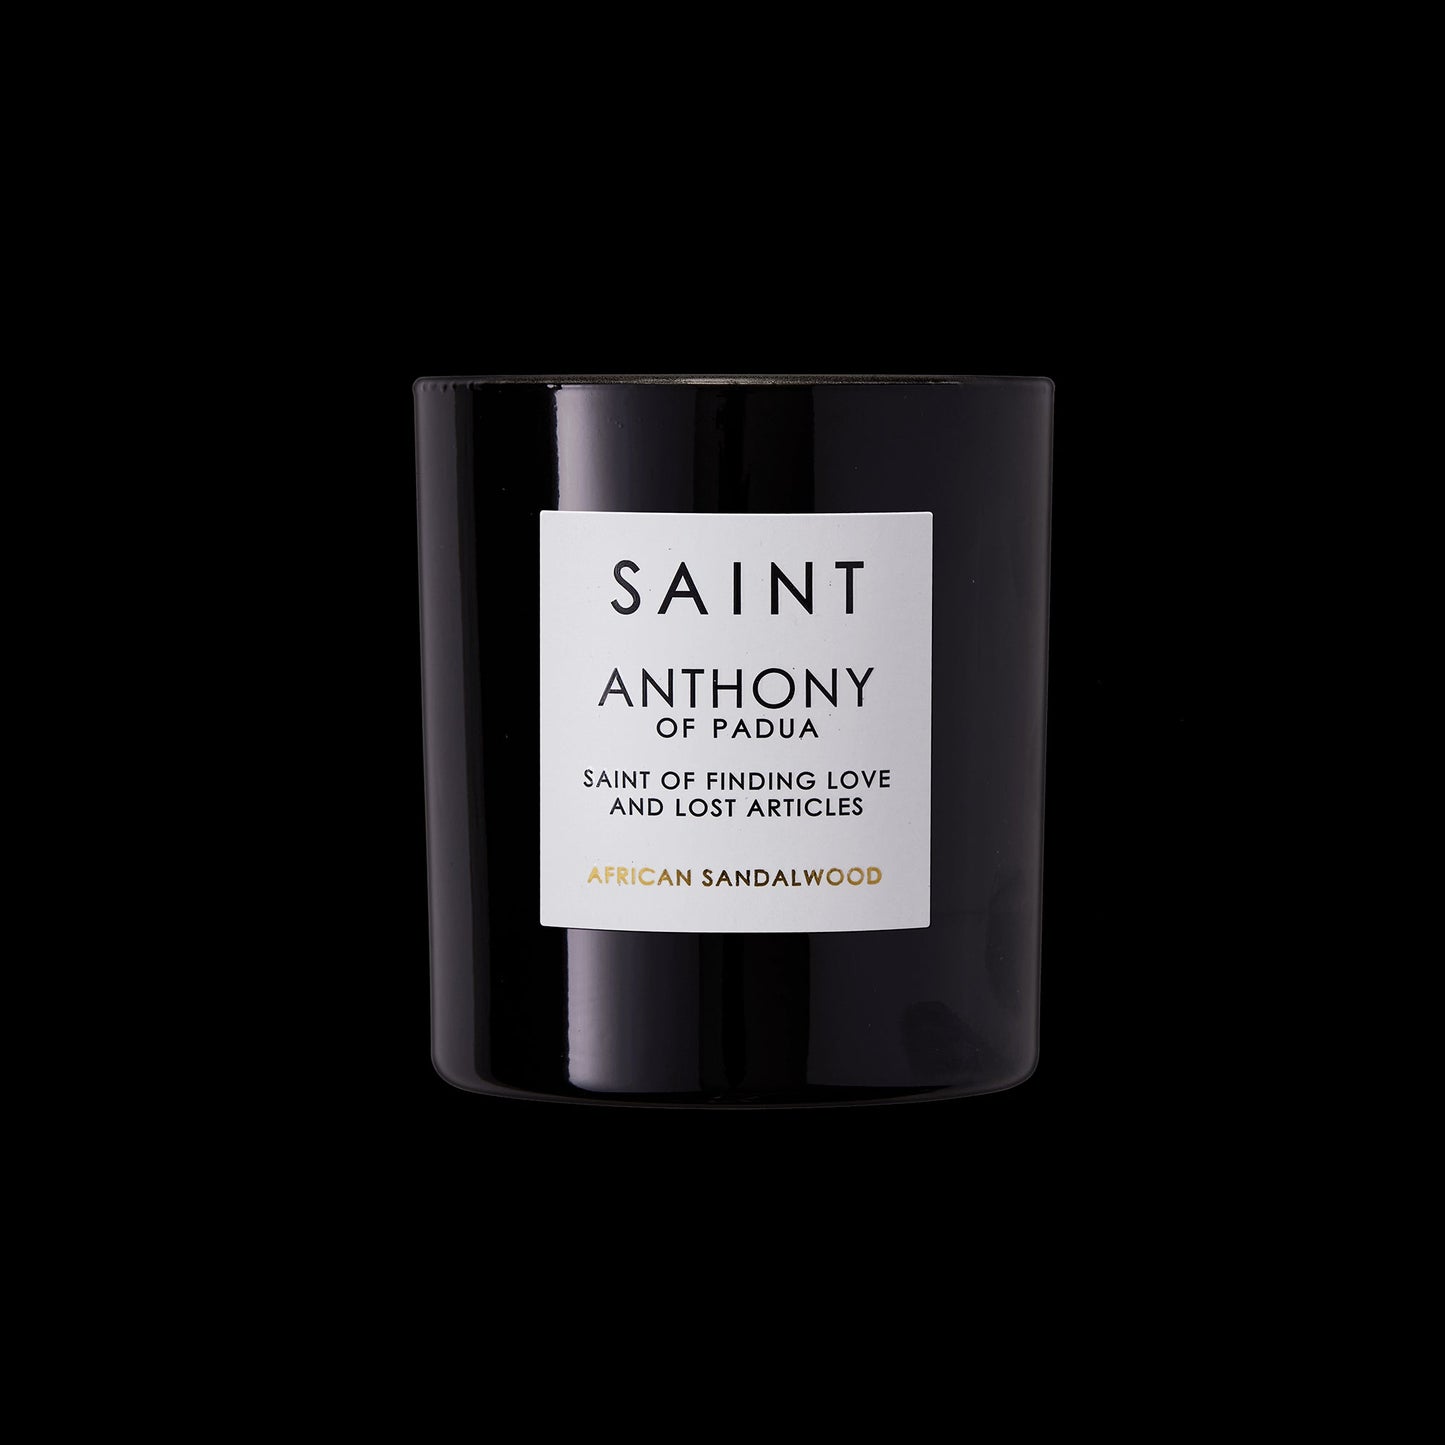 Saint Anthony of Padua Candle: Love and Lost Articles